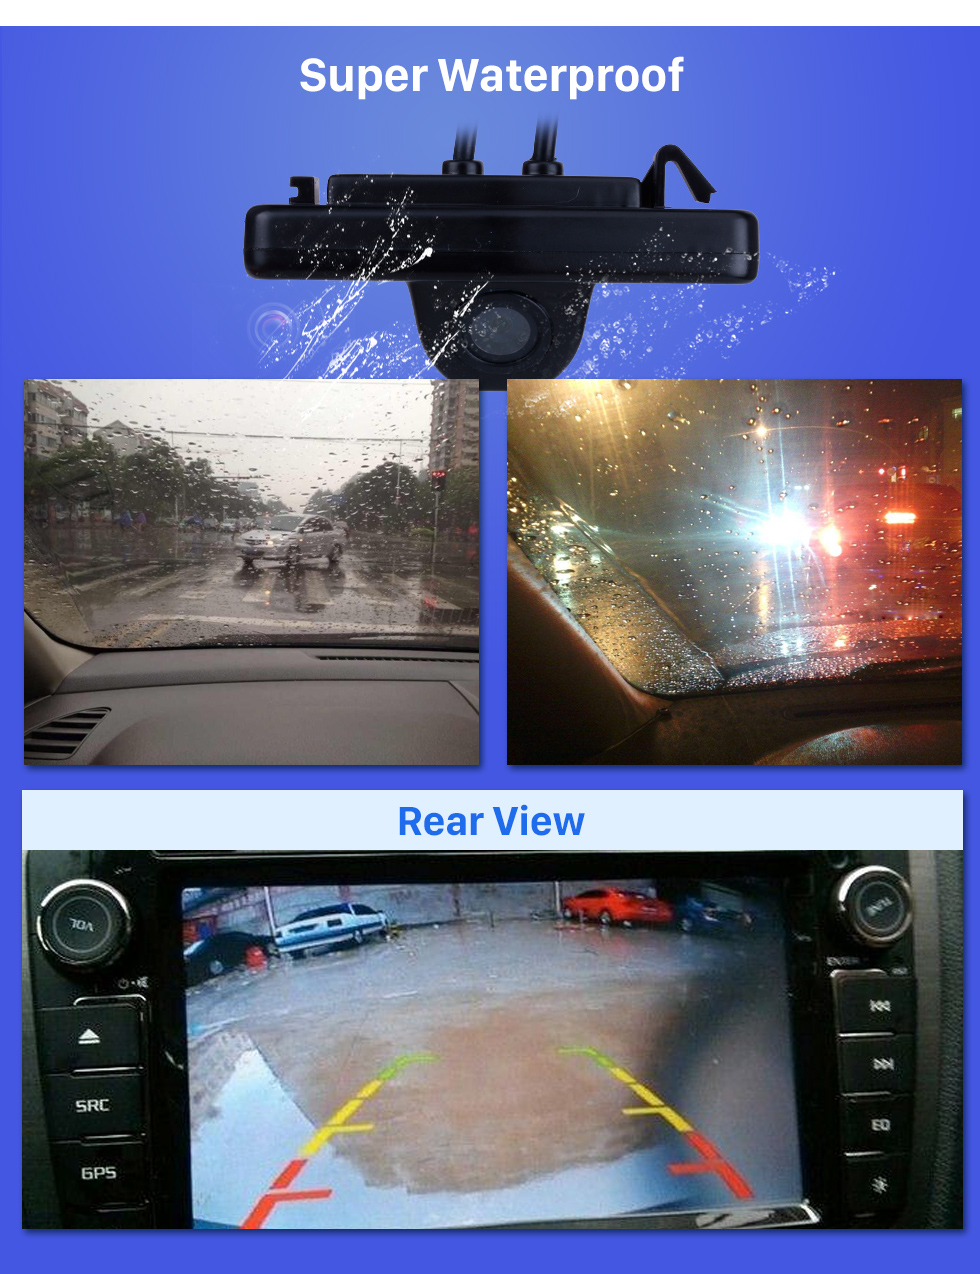 Seicane  HD Rearview LED Camera For 2003 2004 2005 2006 2007 Honda Accord 7 Support Waterproof,Shockproof and clear night vision with no need to drill hole+Automatic white balance